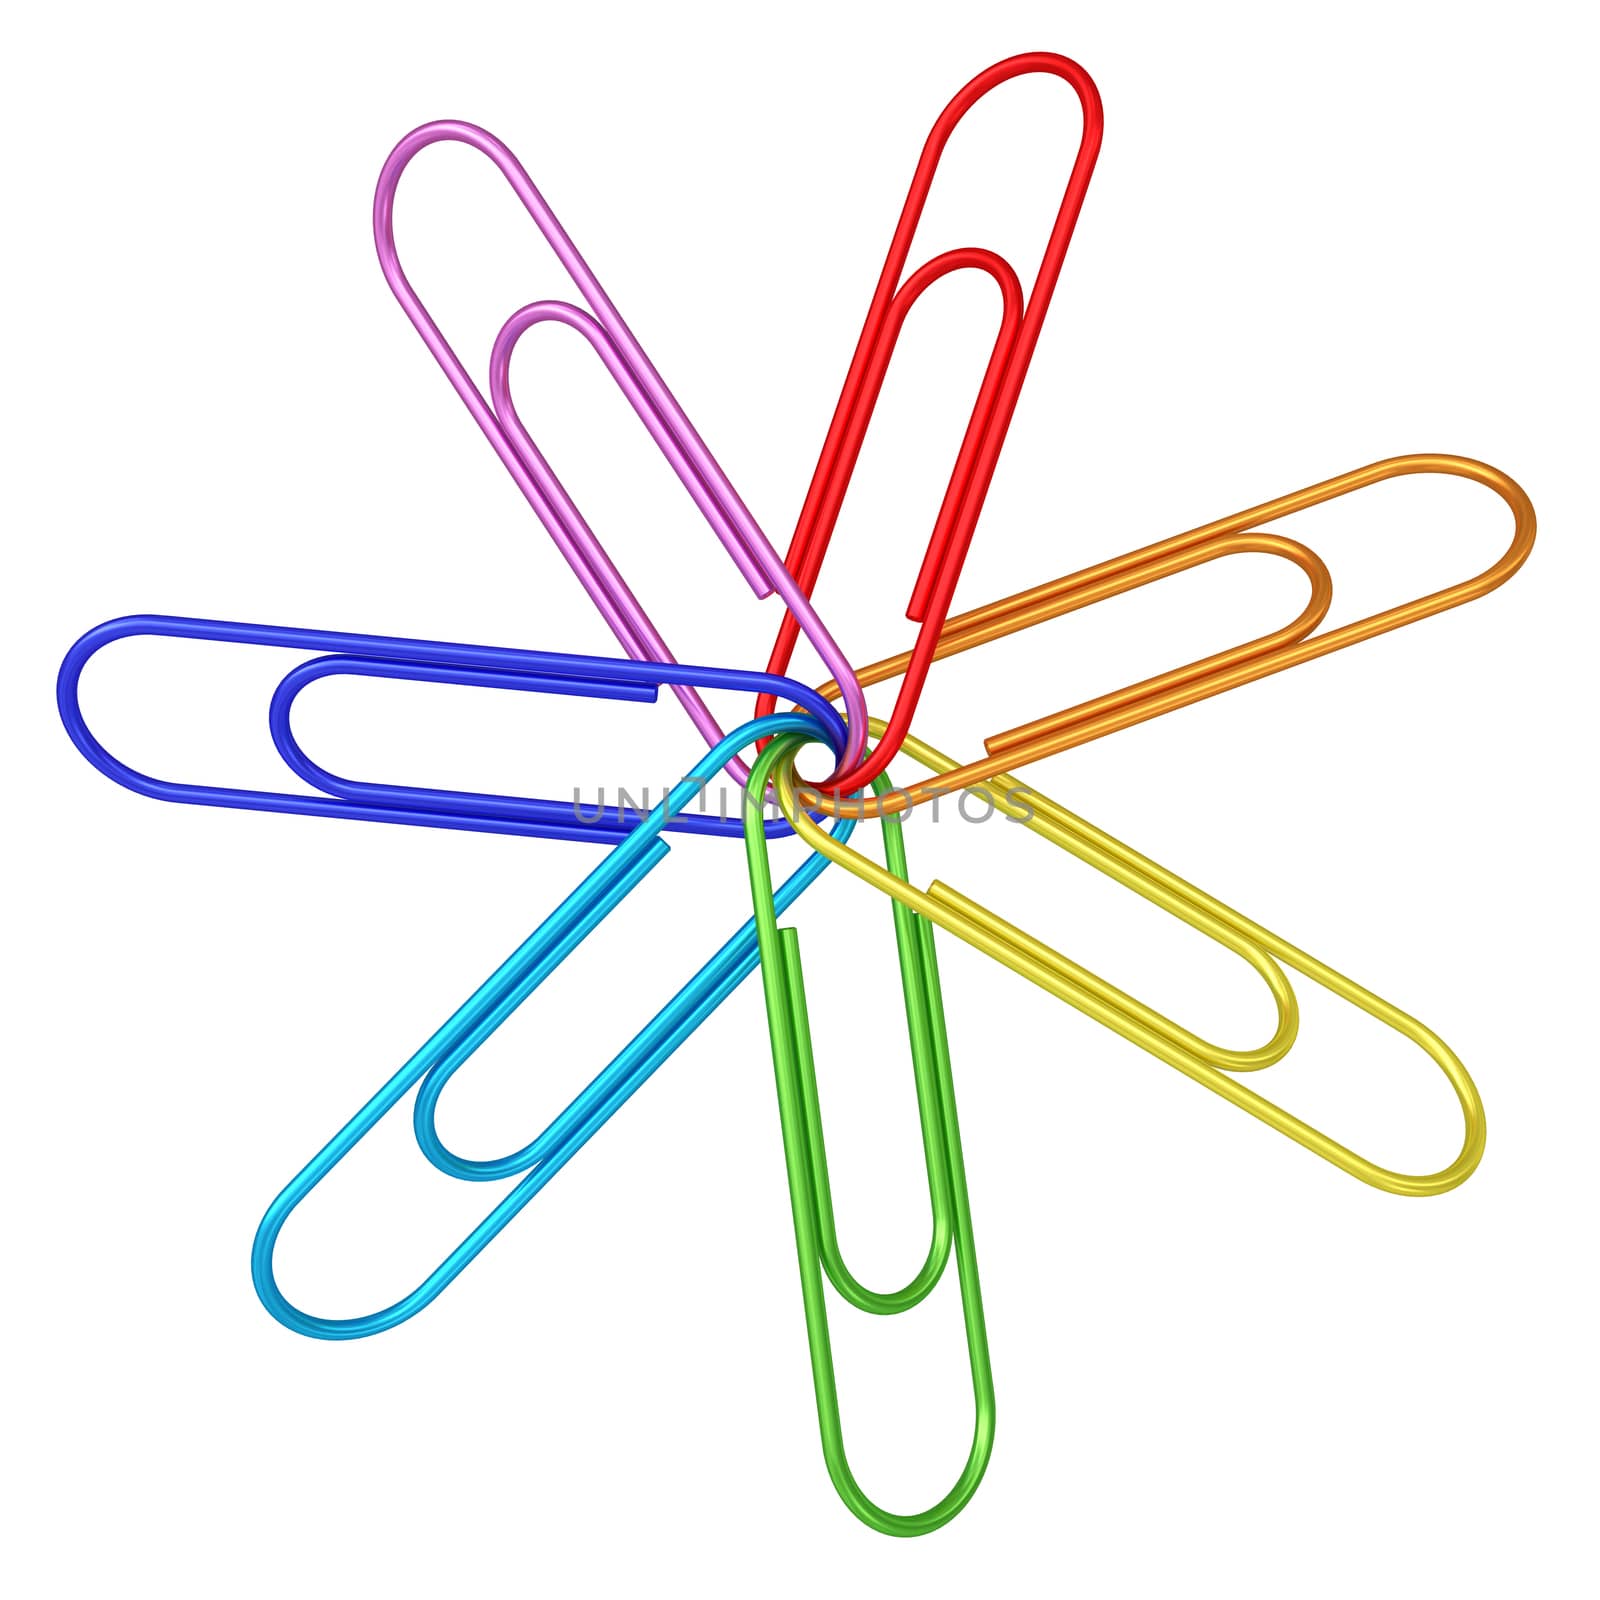 Colorful paper clips chained together on white background. High resolution 3D image